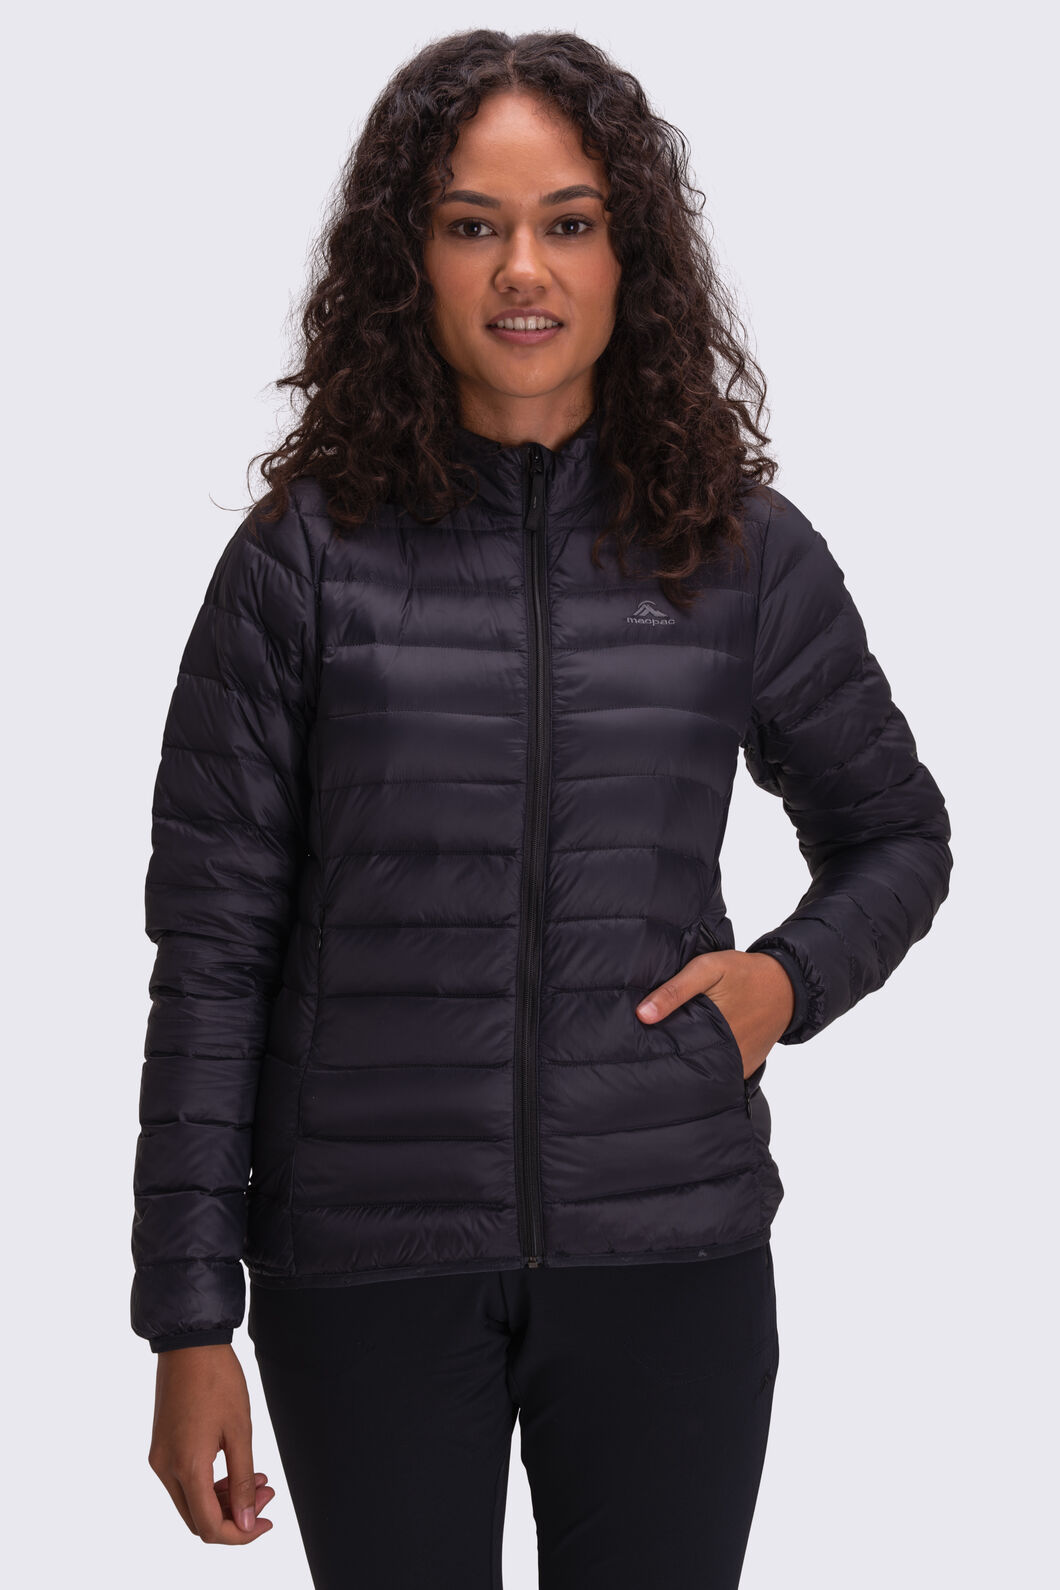 Unlock Wilderness' choice in the Macpac Vs North Face comparison, the Uber Light Down Jacket by Macpac